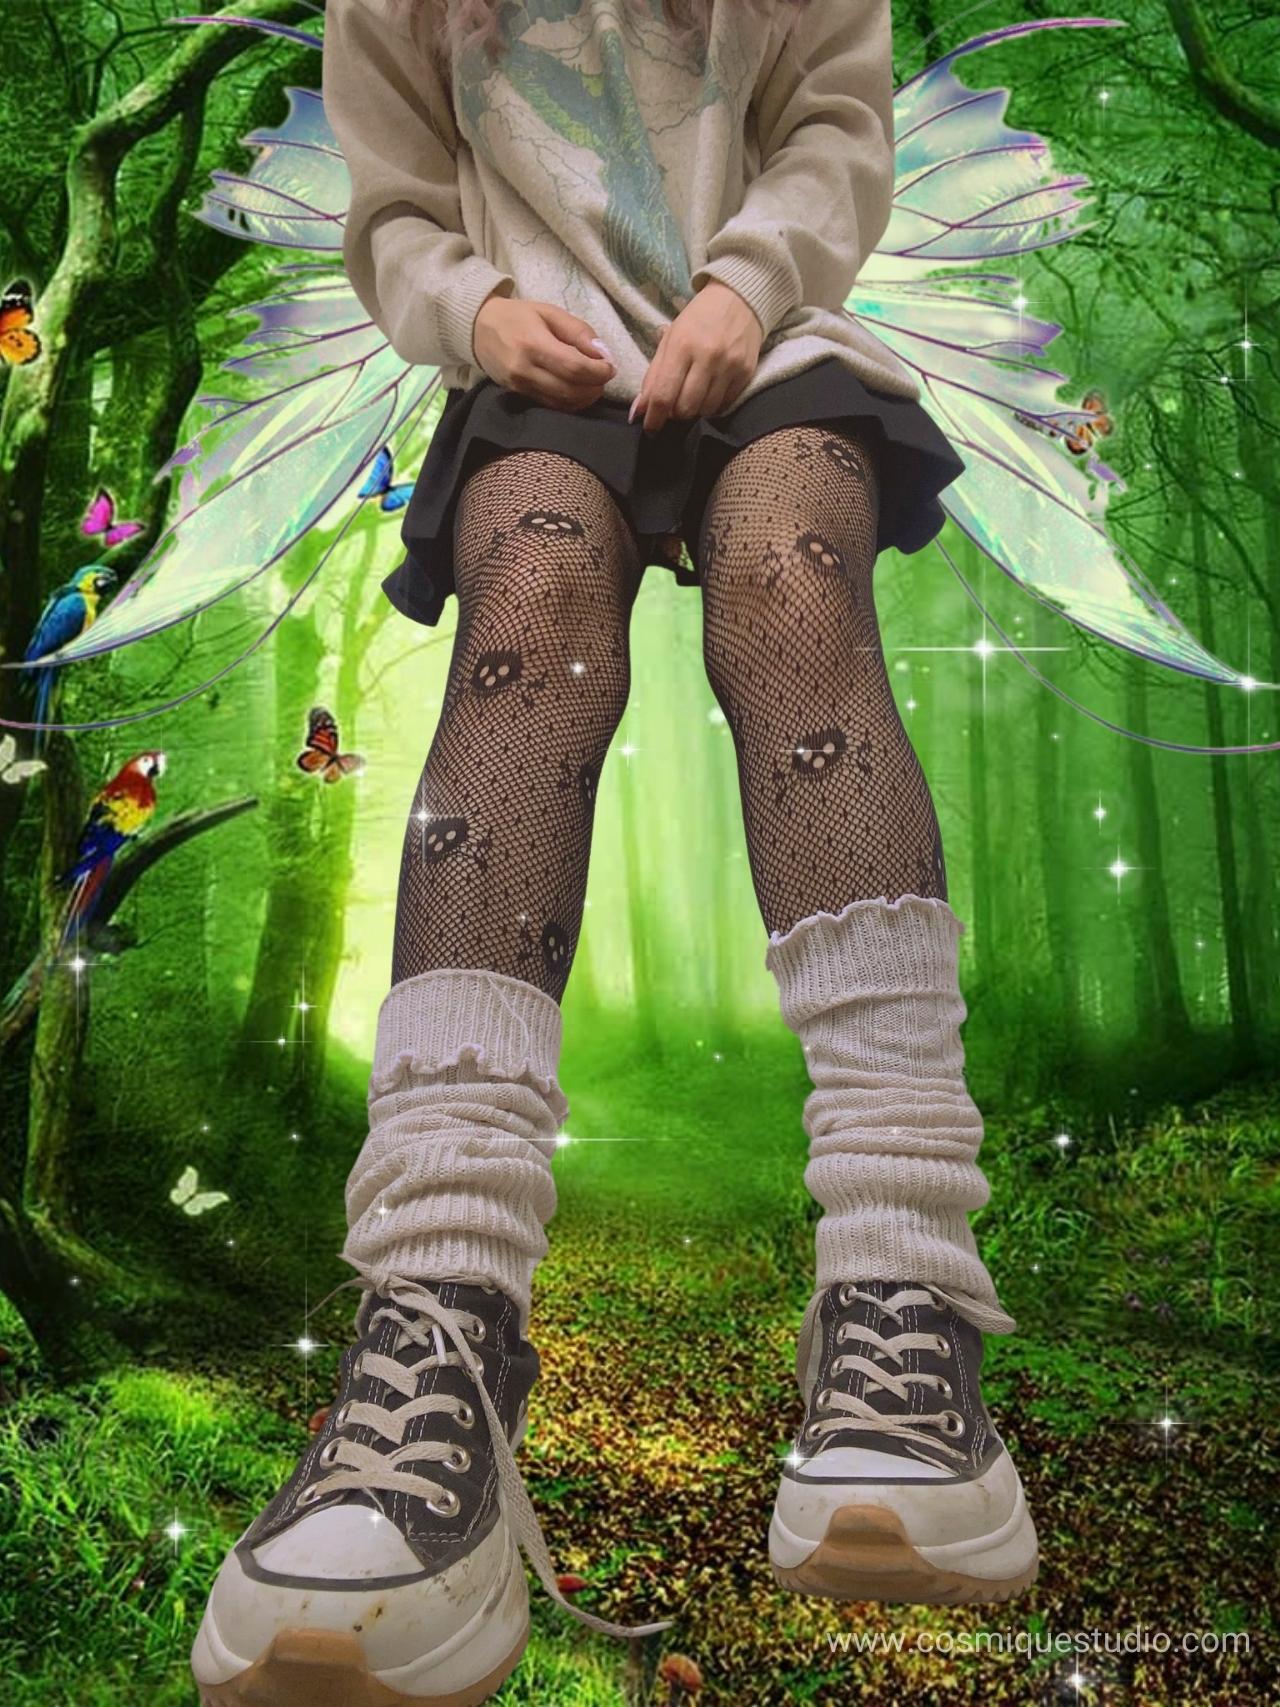 A fairy grunge girl wearing Converse with skull tights, a black skirt and a hoodie, and she is in the forest with butterflies and parrots.